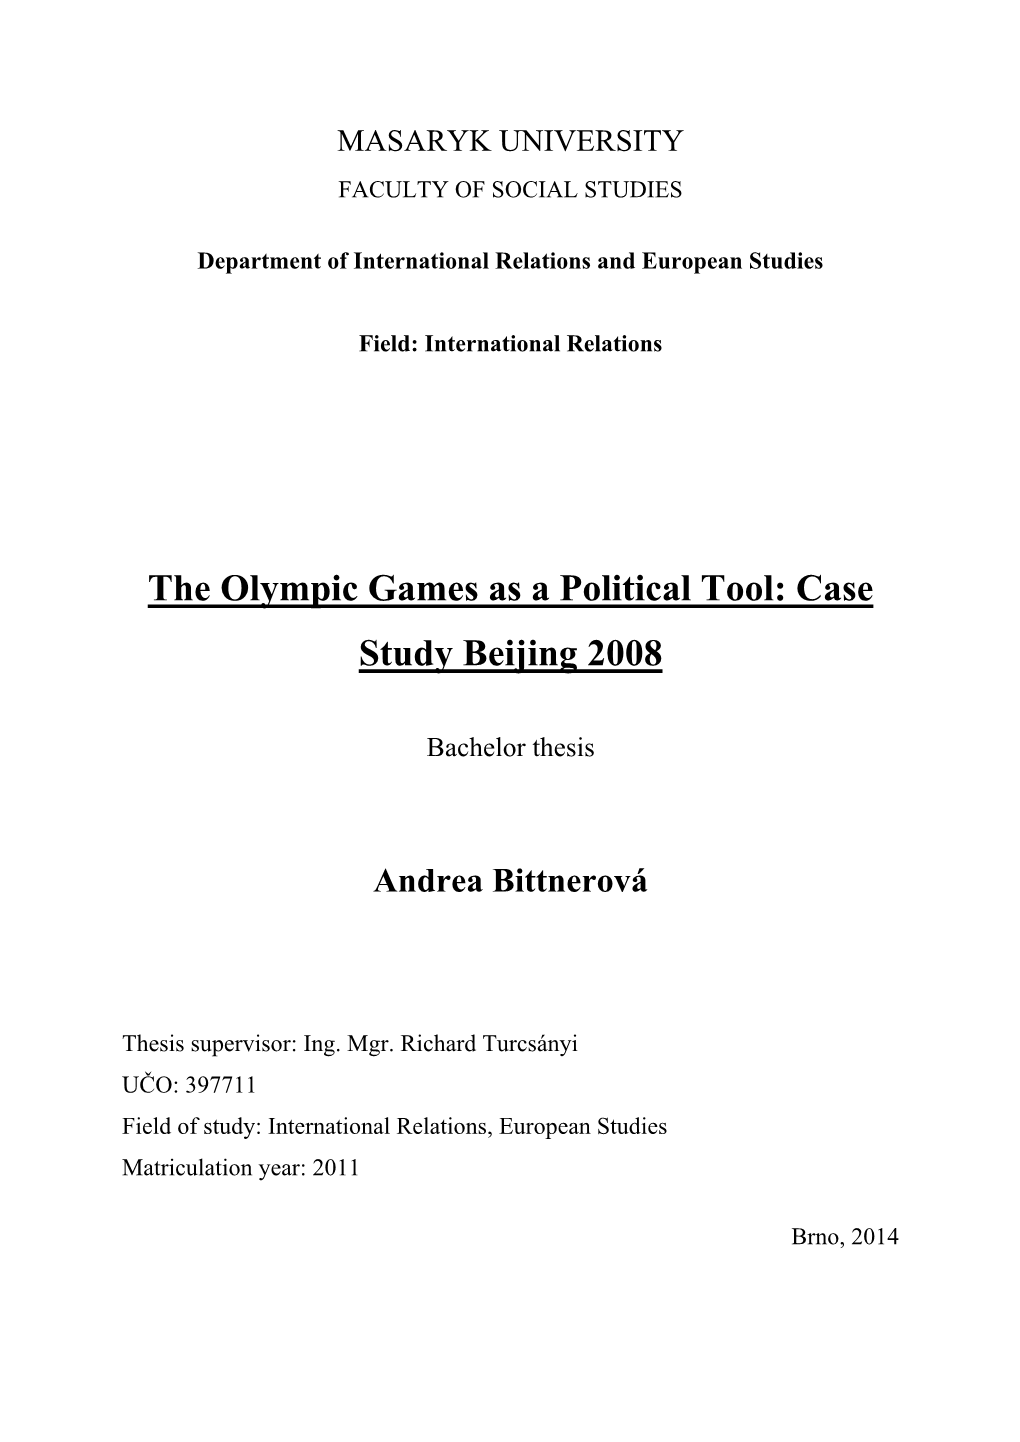 The Olympic Games As a Political Tool: Case Study Beijing 2008